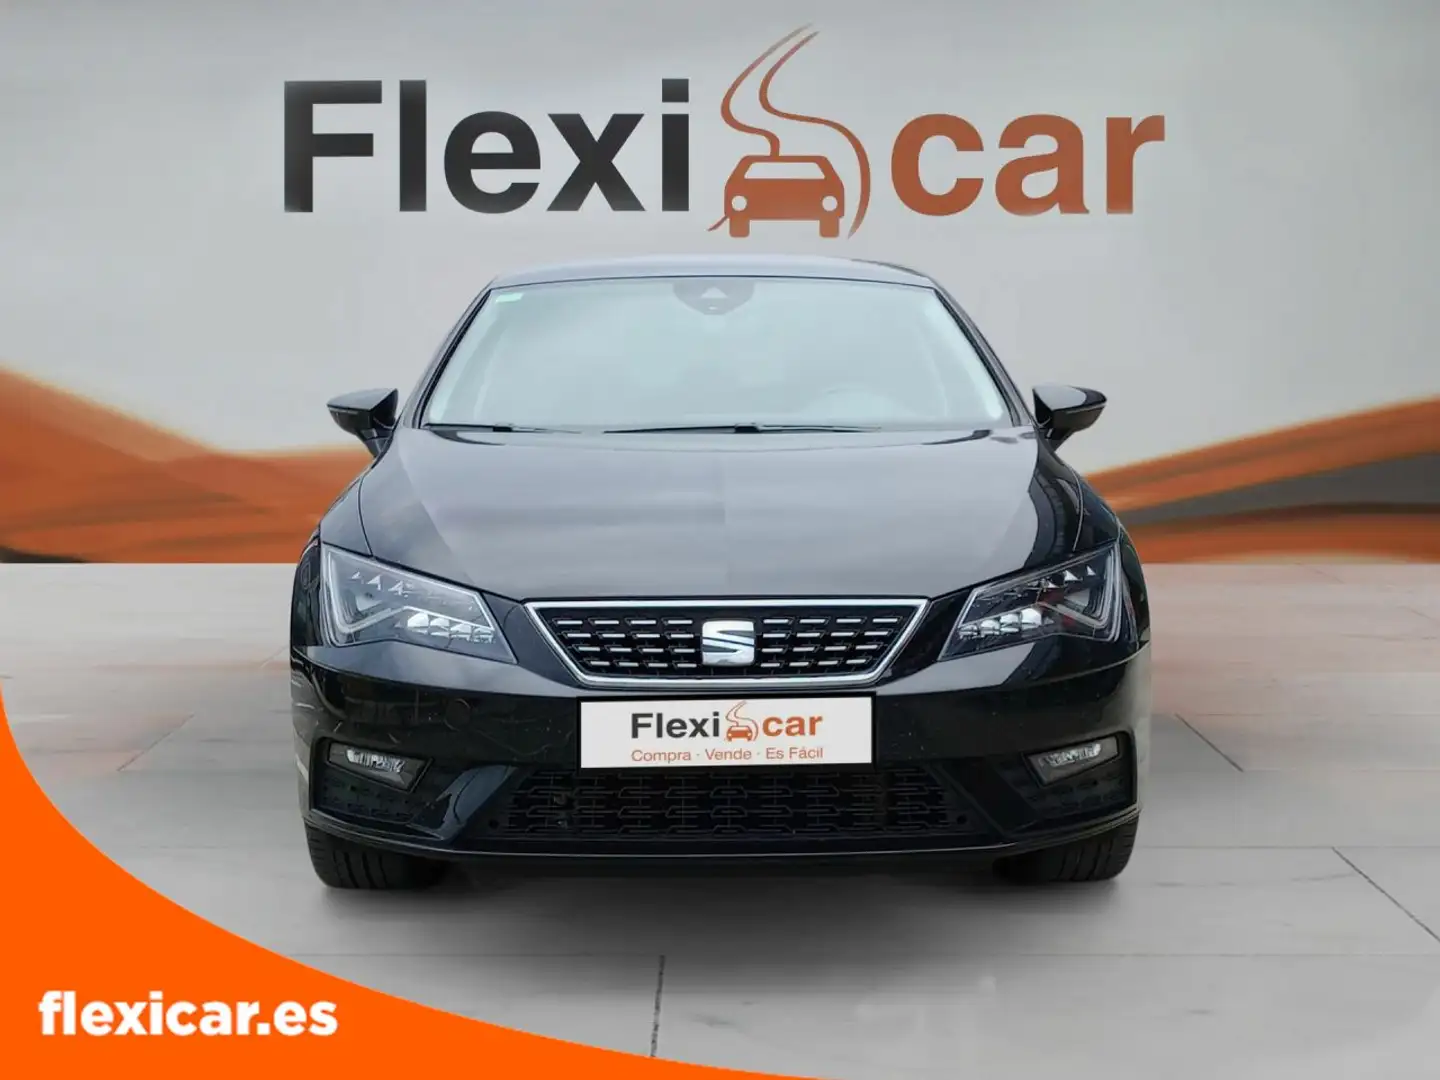 SEAT Leon 1.4 TSI 110kW ACT DSG-7 St&Sp Xcell Pl - 2